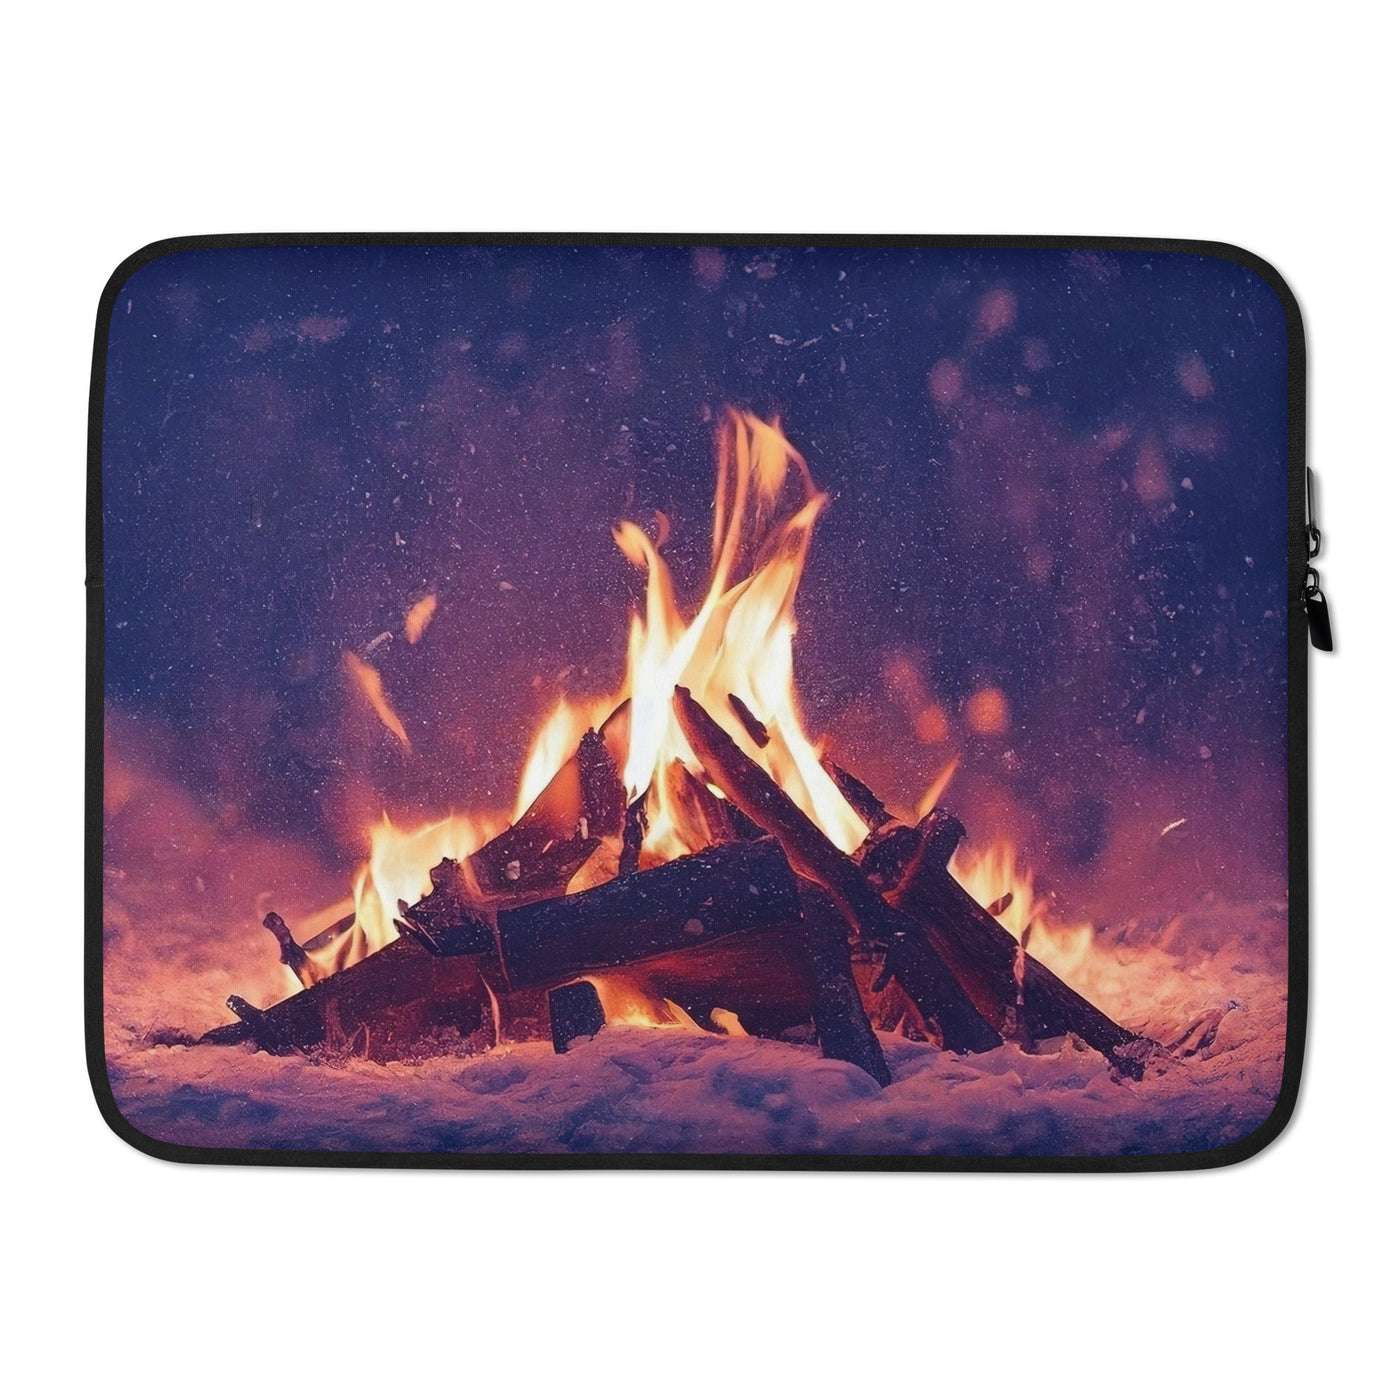 Lagerfeuer im Winter - Campingtrip Foto - Laptophülle camping xxx 15″